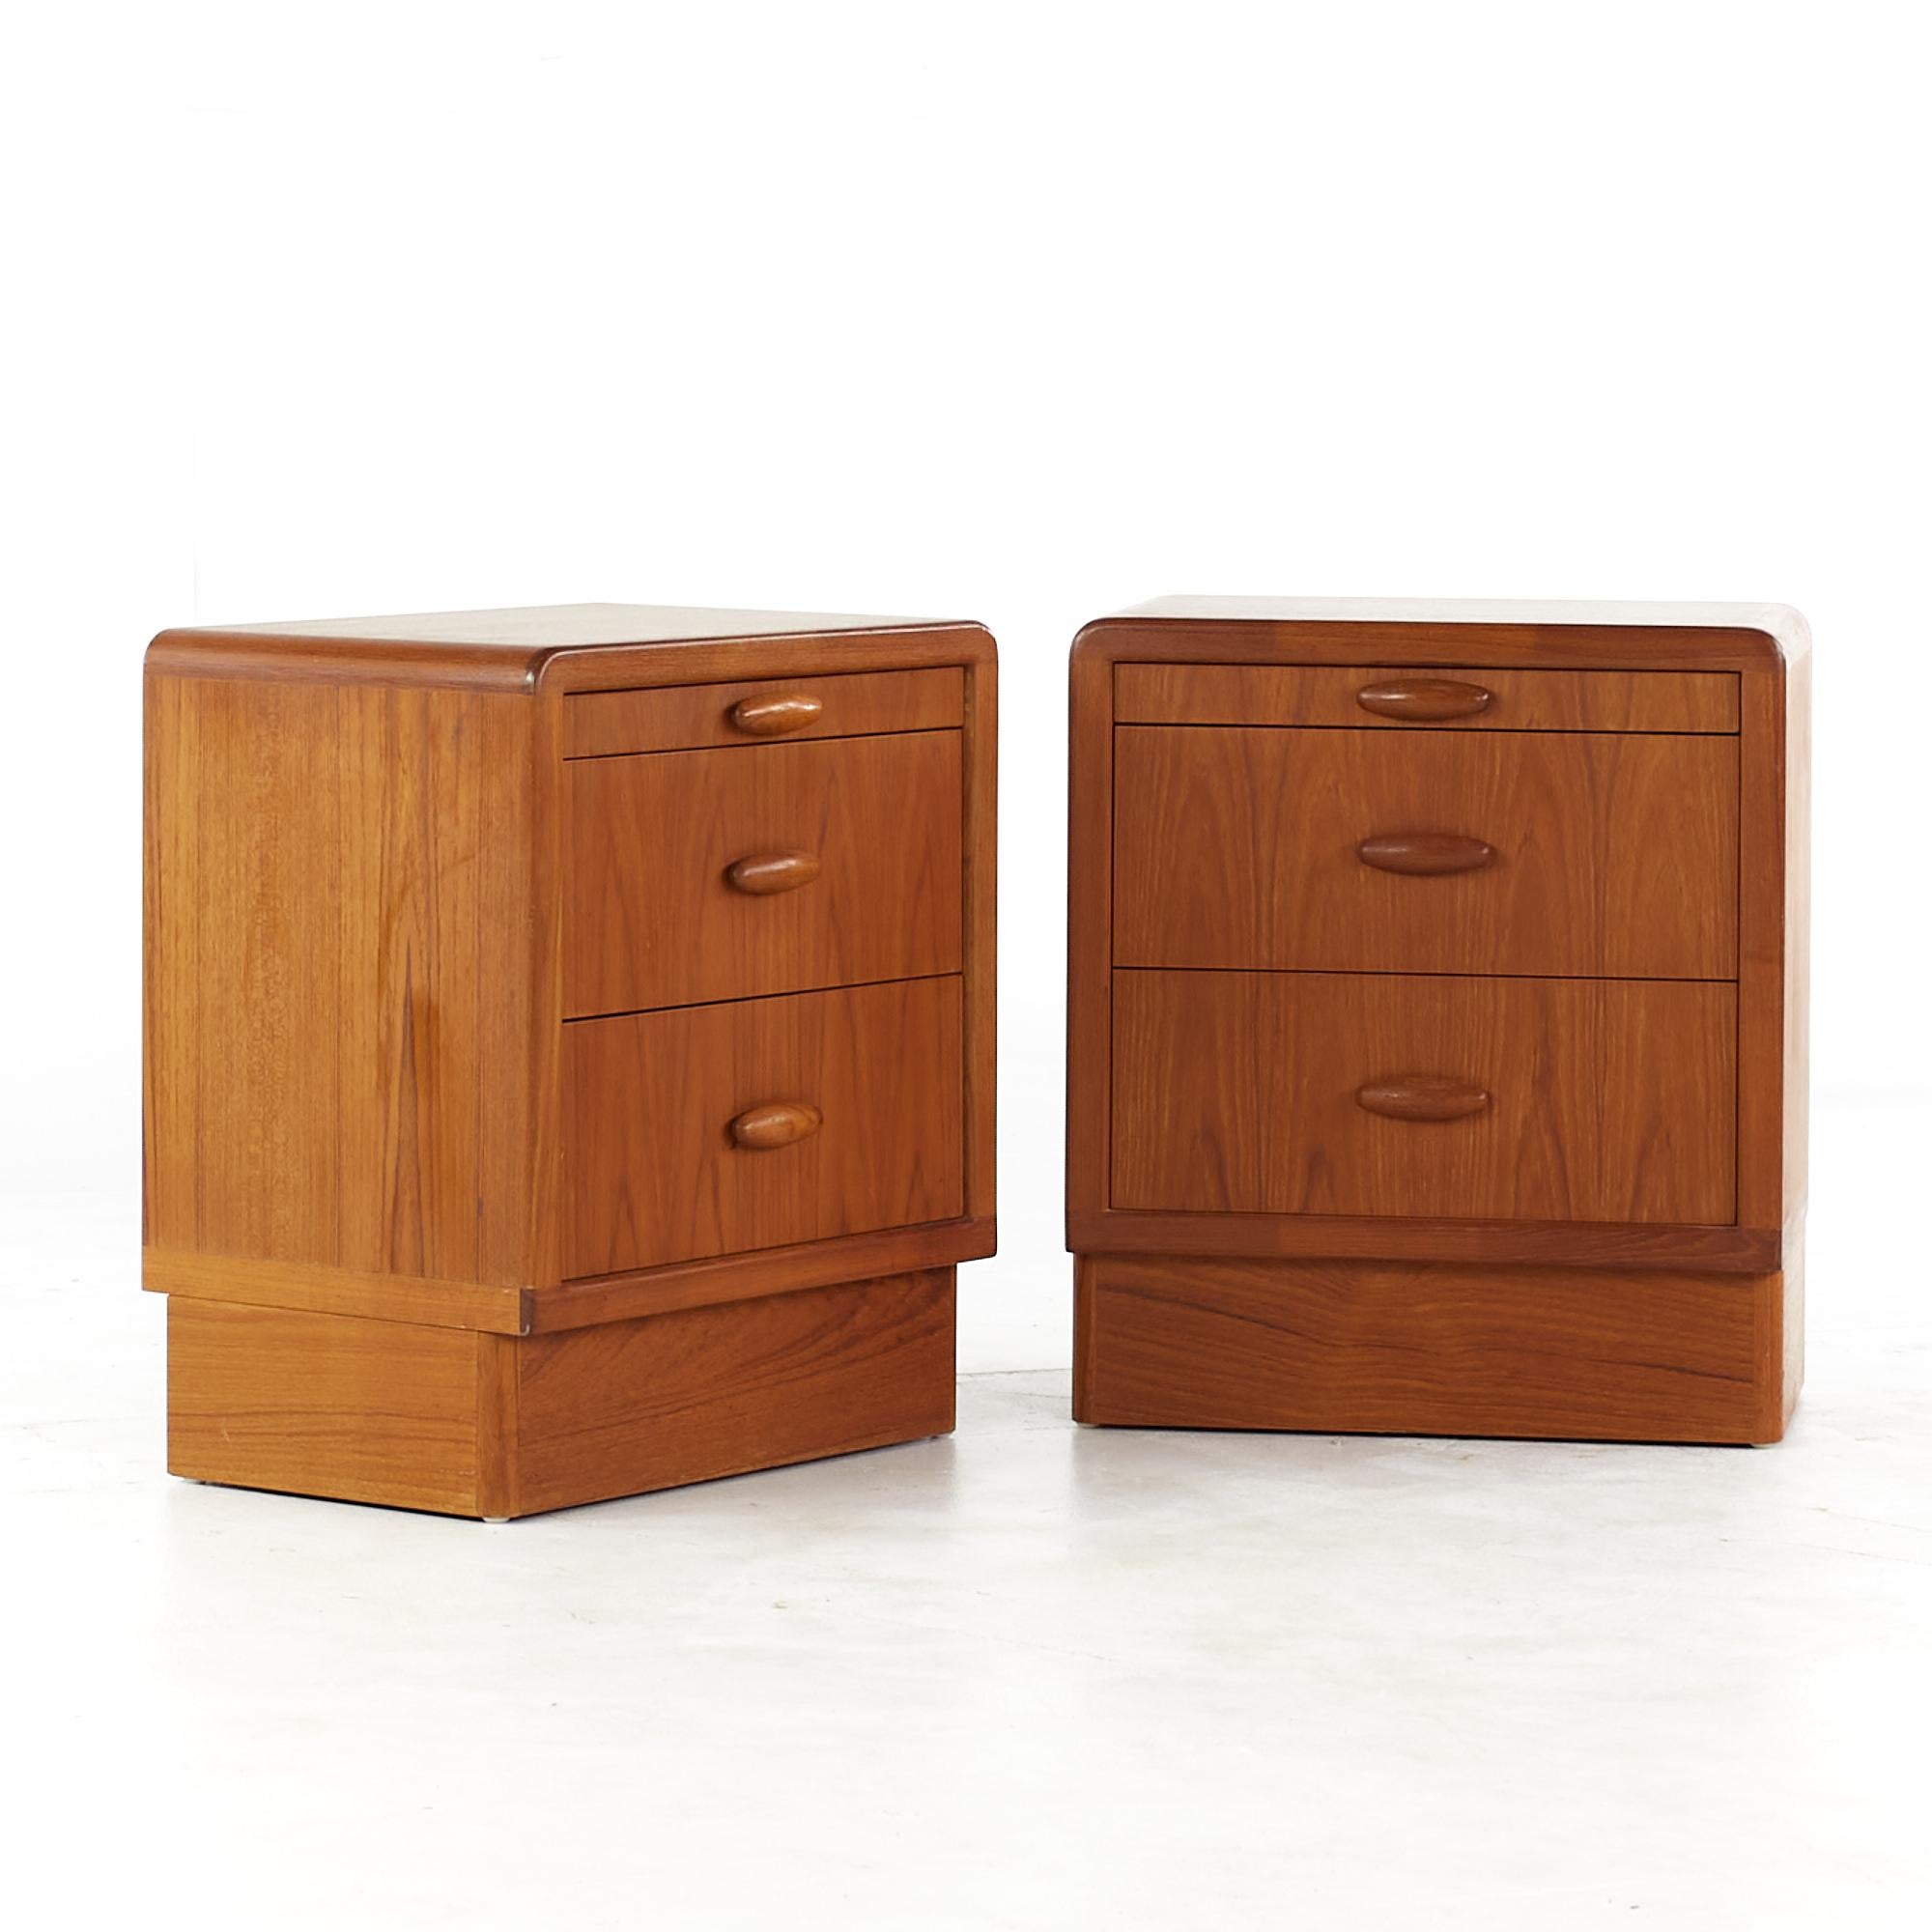 Dyrlund mid-century Danish teak nightstands -pair.

Each nightstand measures: 19.25 wide x 13.5 deep x 22 inches high.

All pieces of furniture can be had in what we call restored vintage condition. That means the piece is restored upon purchase